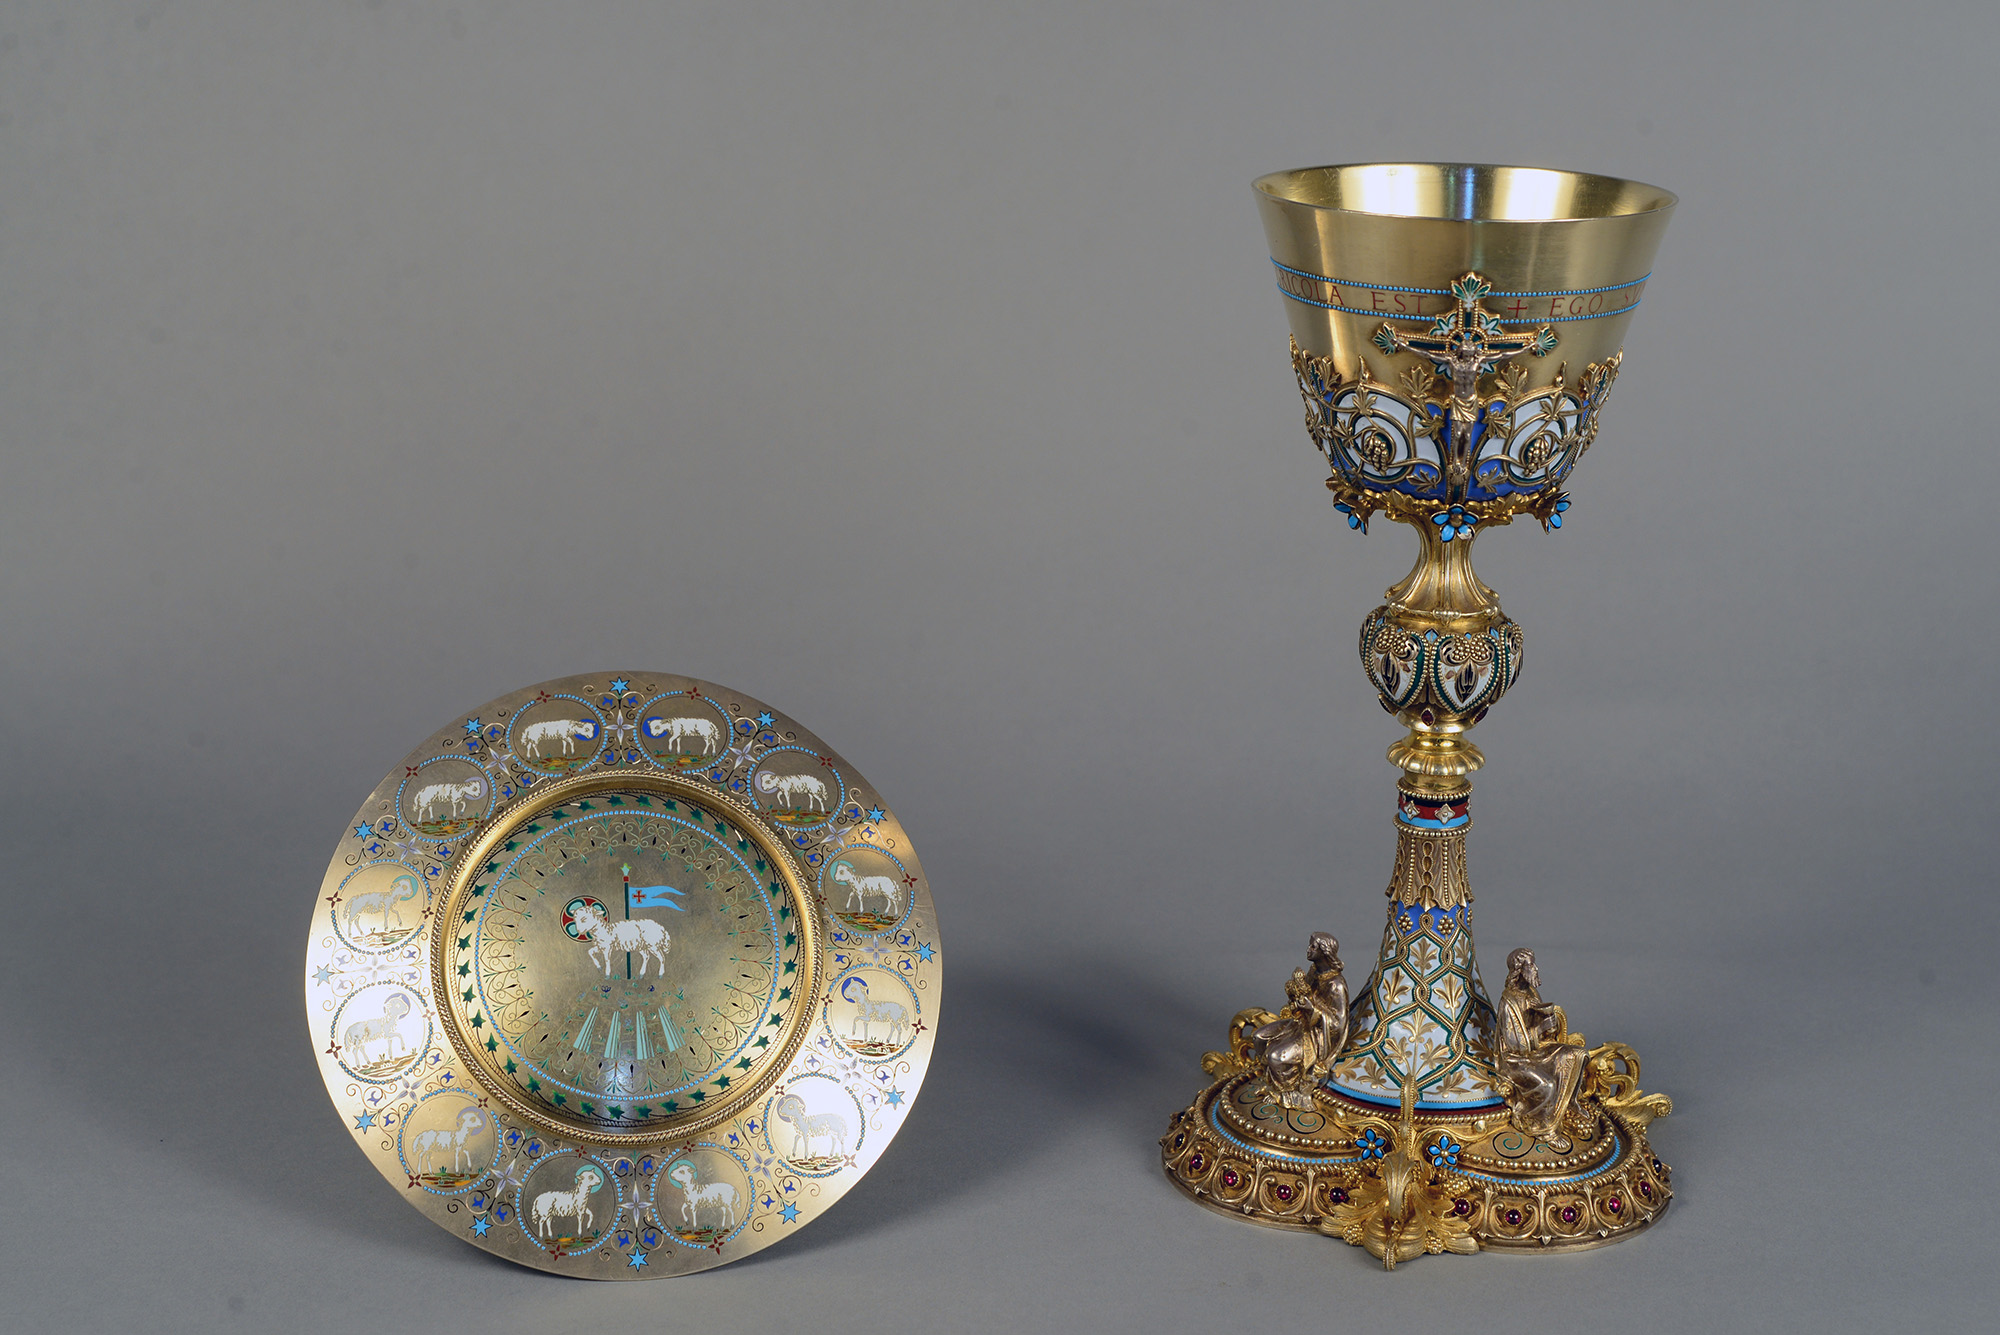 Chalice with paten of Blessed Pope Pius IX (r. 1846-1878)